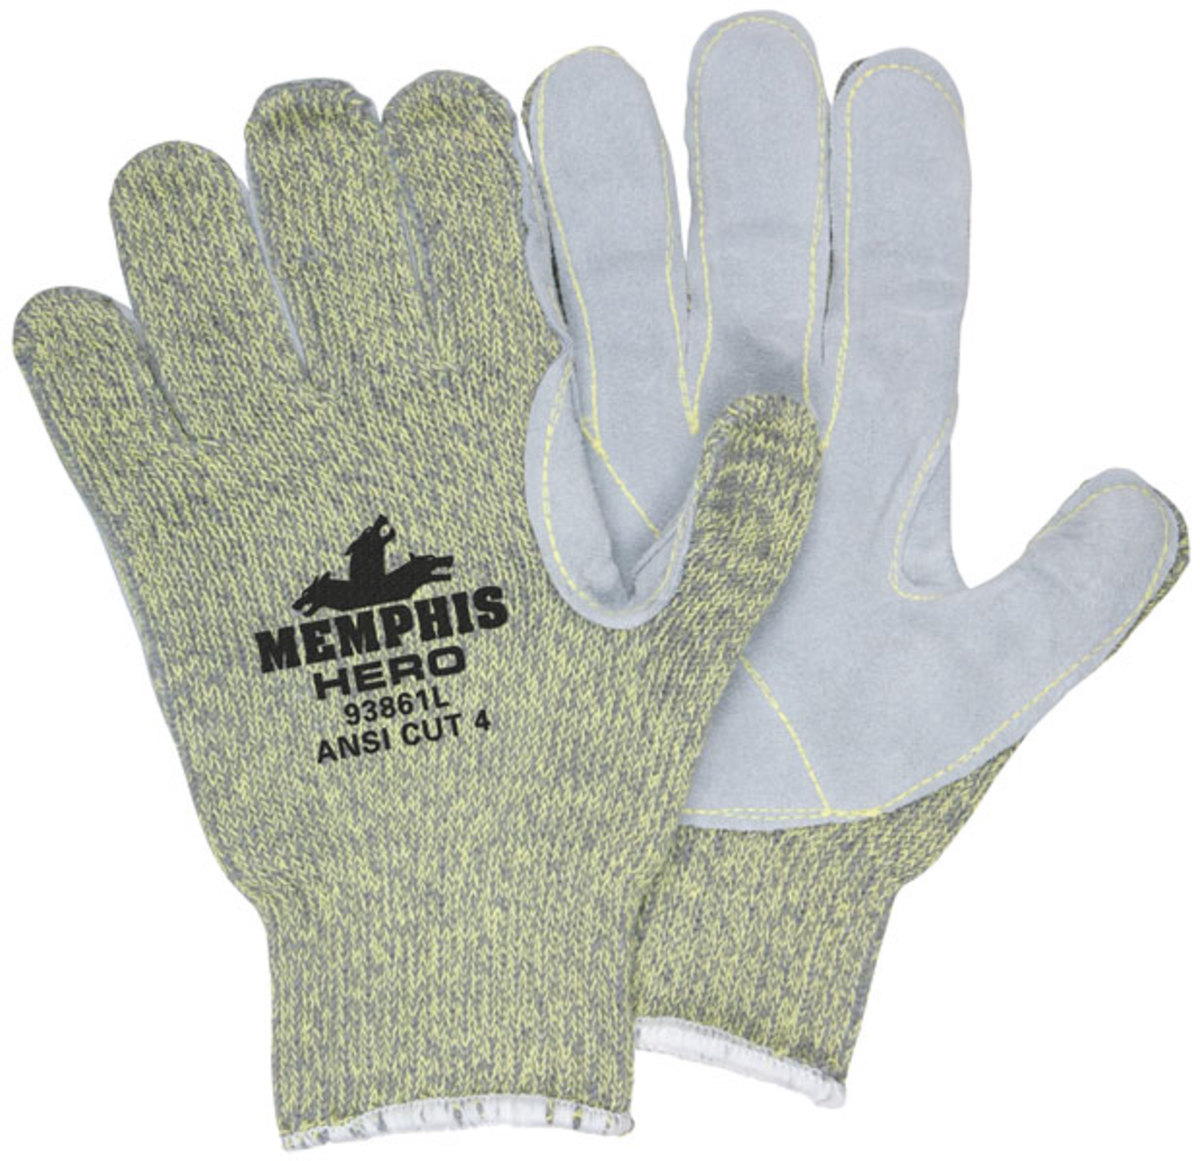 MCR Safety® Large Cut Pro™ 7 Gauge DuPont™ Kevlar®, Stainless Steel, Nylon And Leather Cut Resistant Gloves